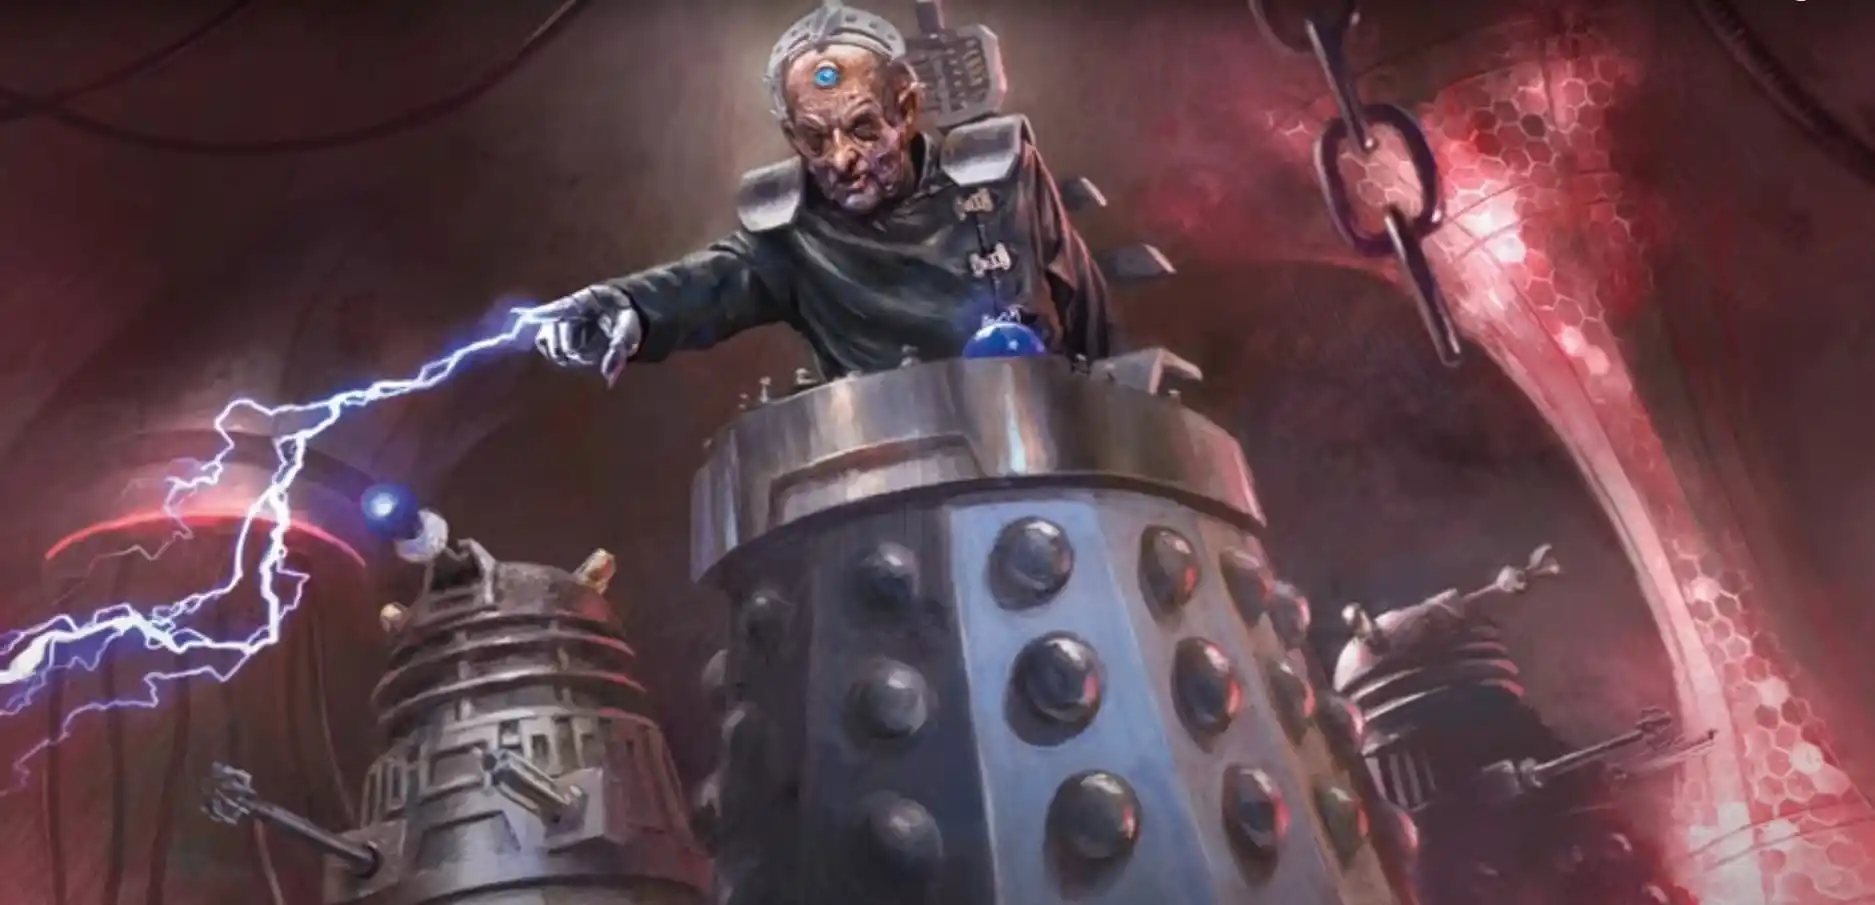 Magic: The Gathering Launches 'Doctor Who' Expansion